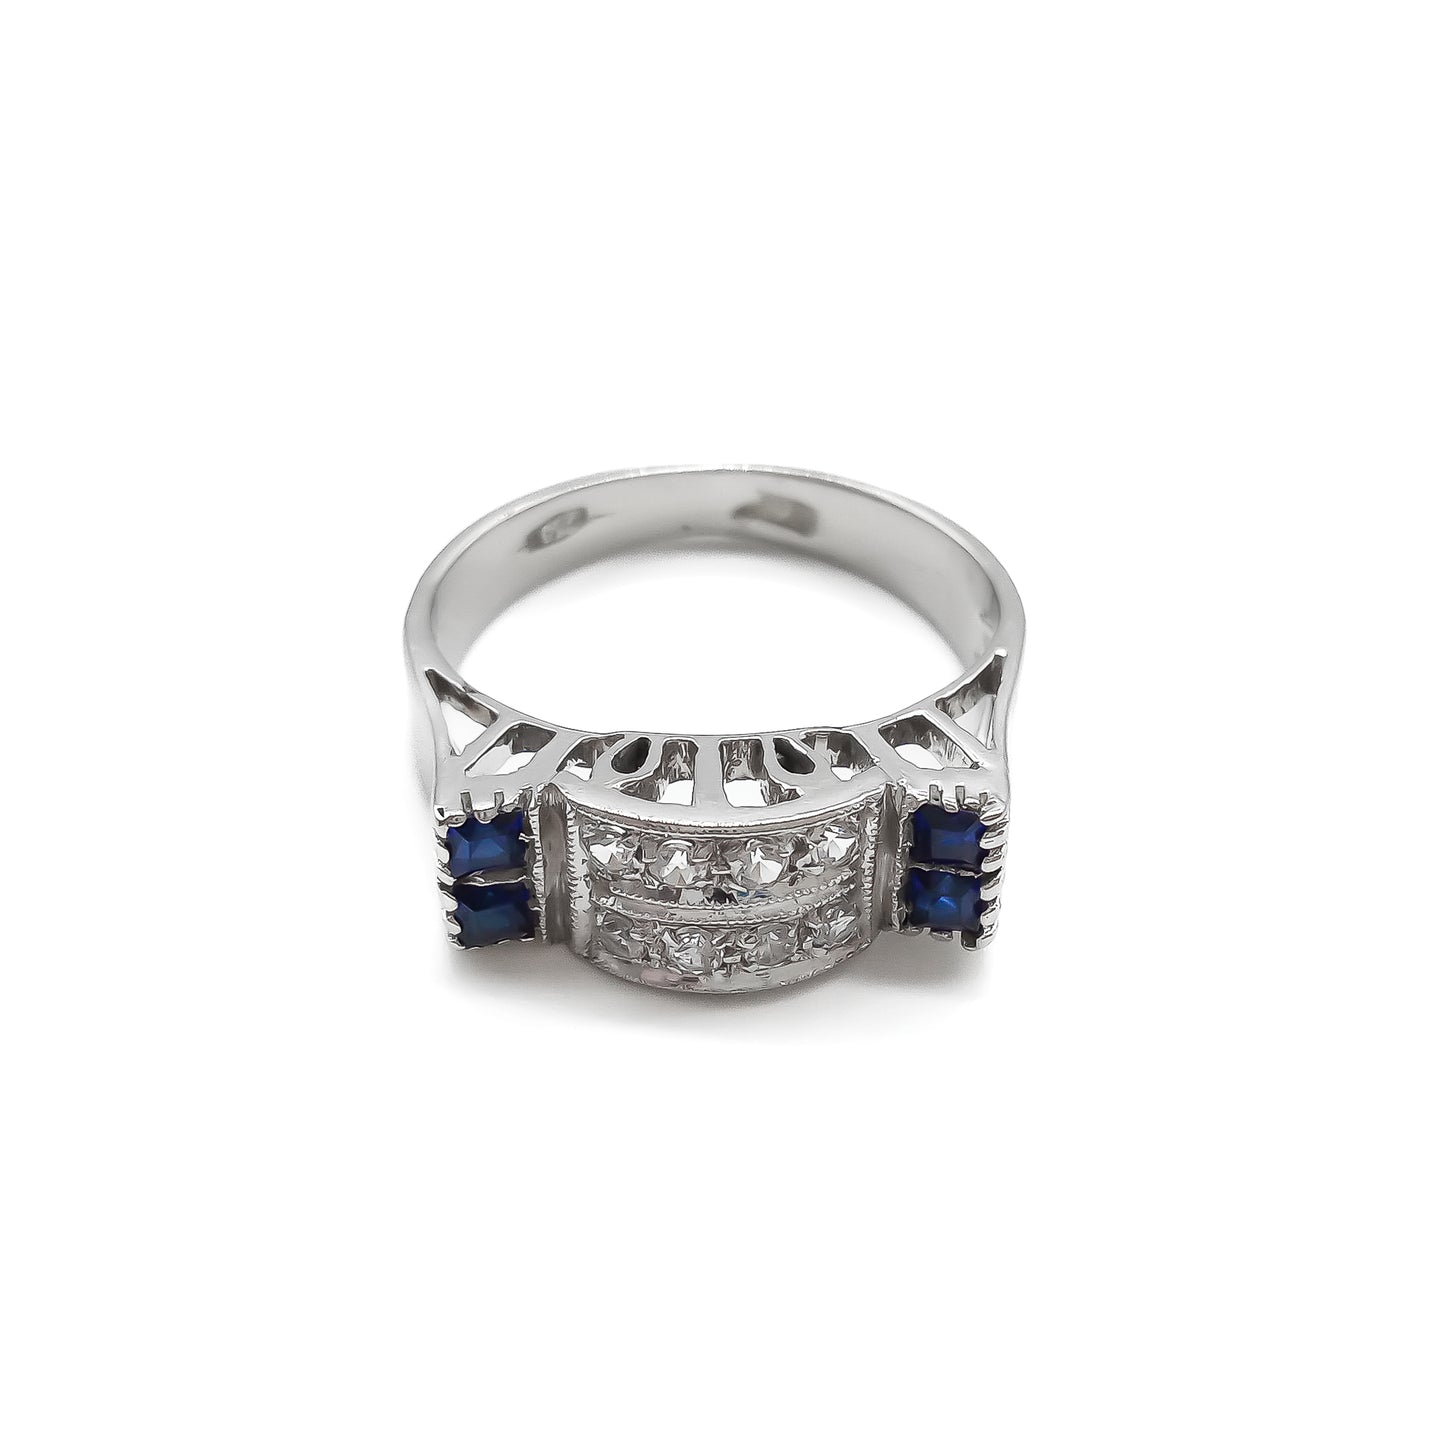 Stylish 18ct white gold ring set with four rectangular sapphires and eight round diamonds.